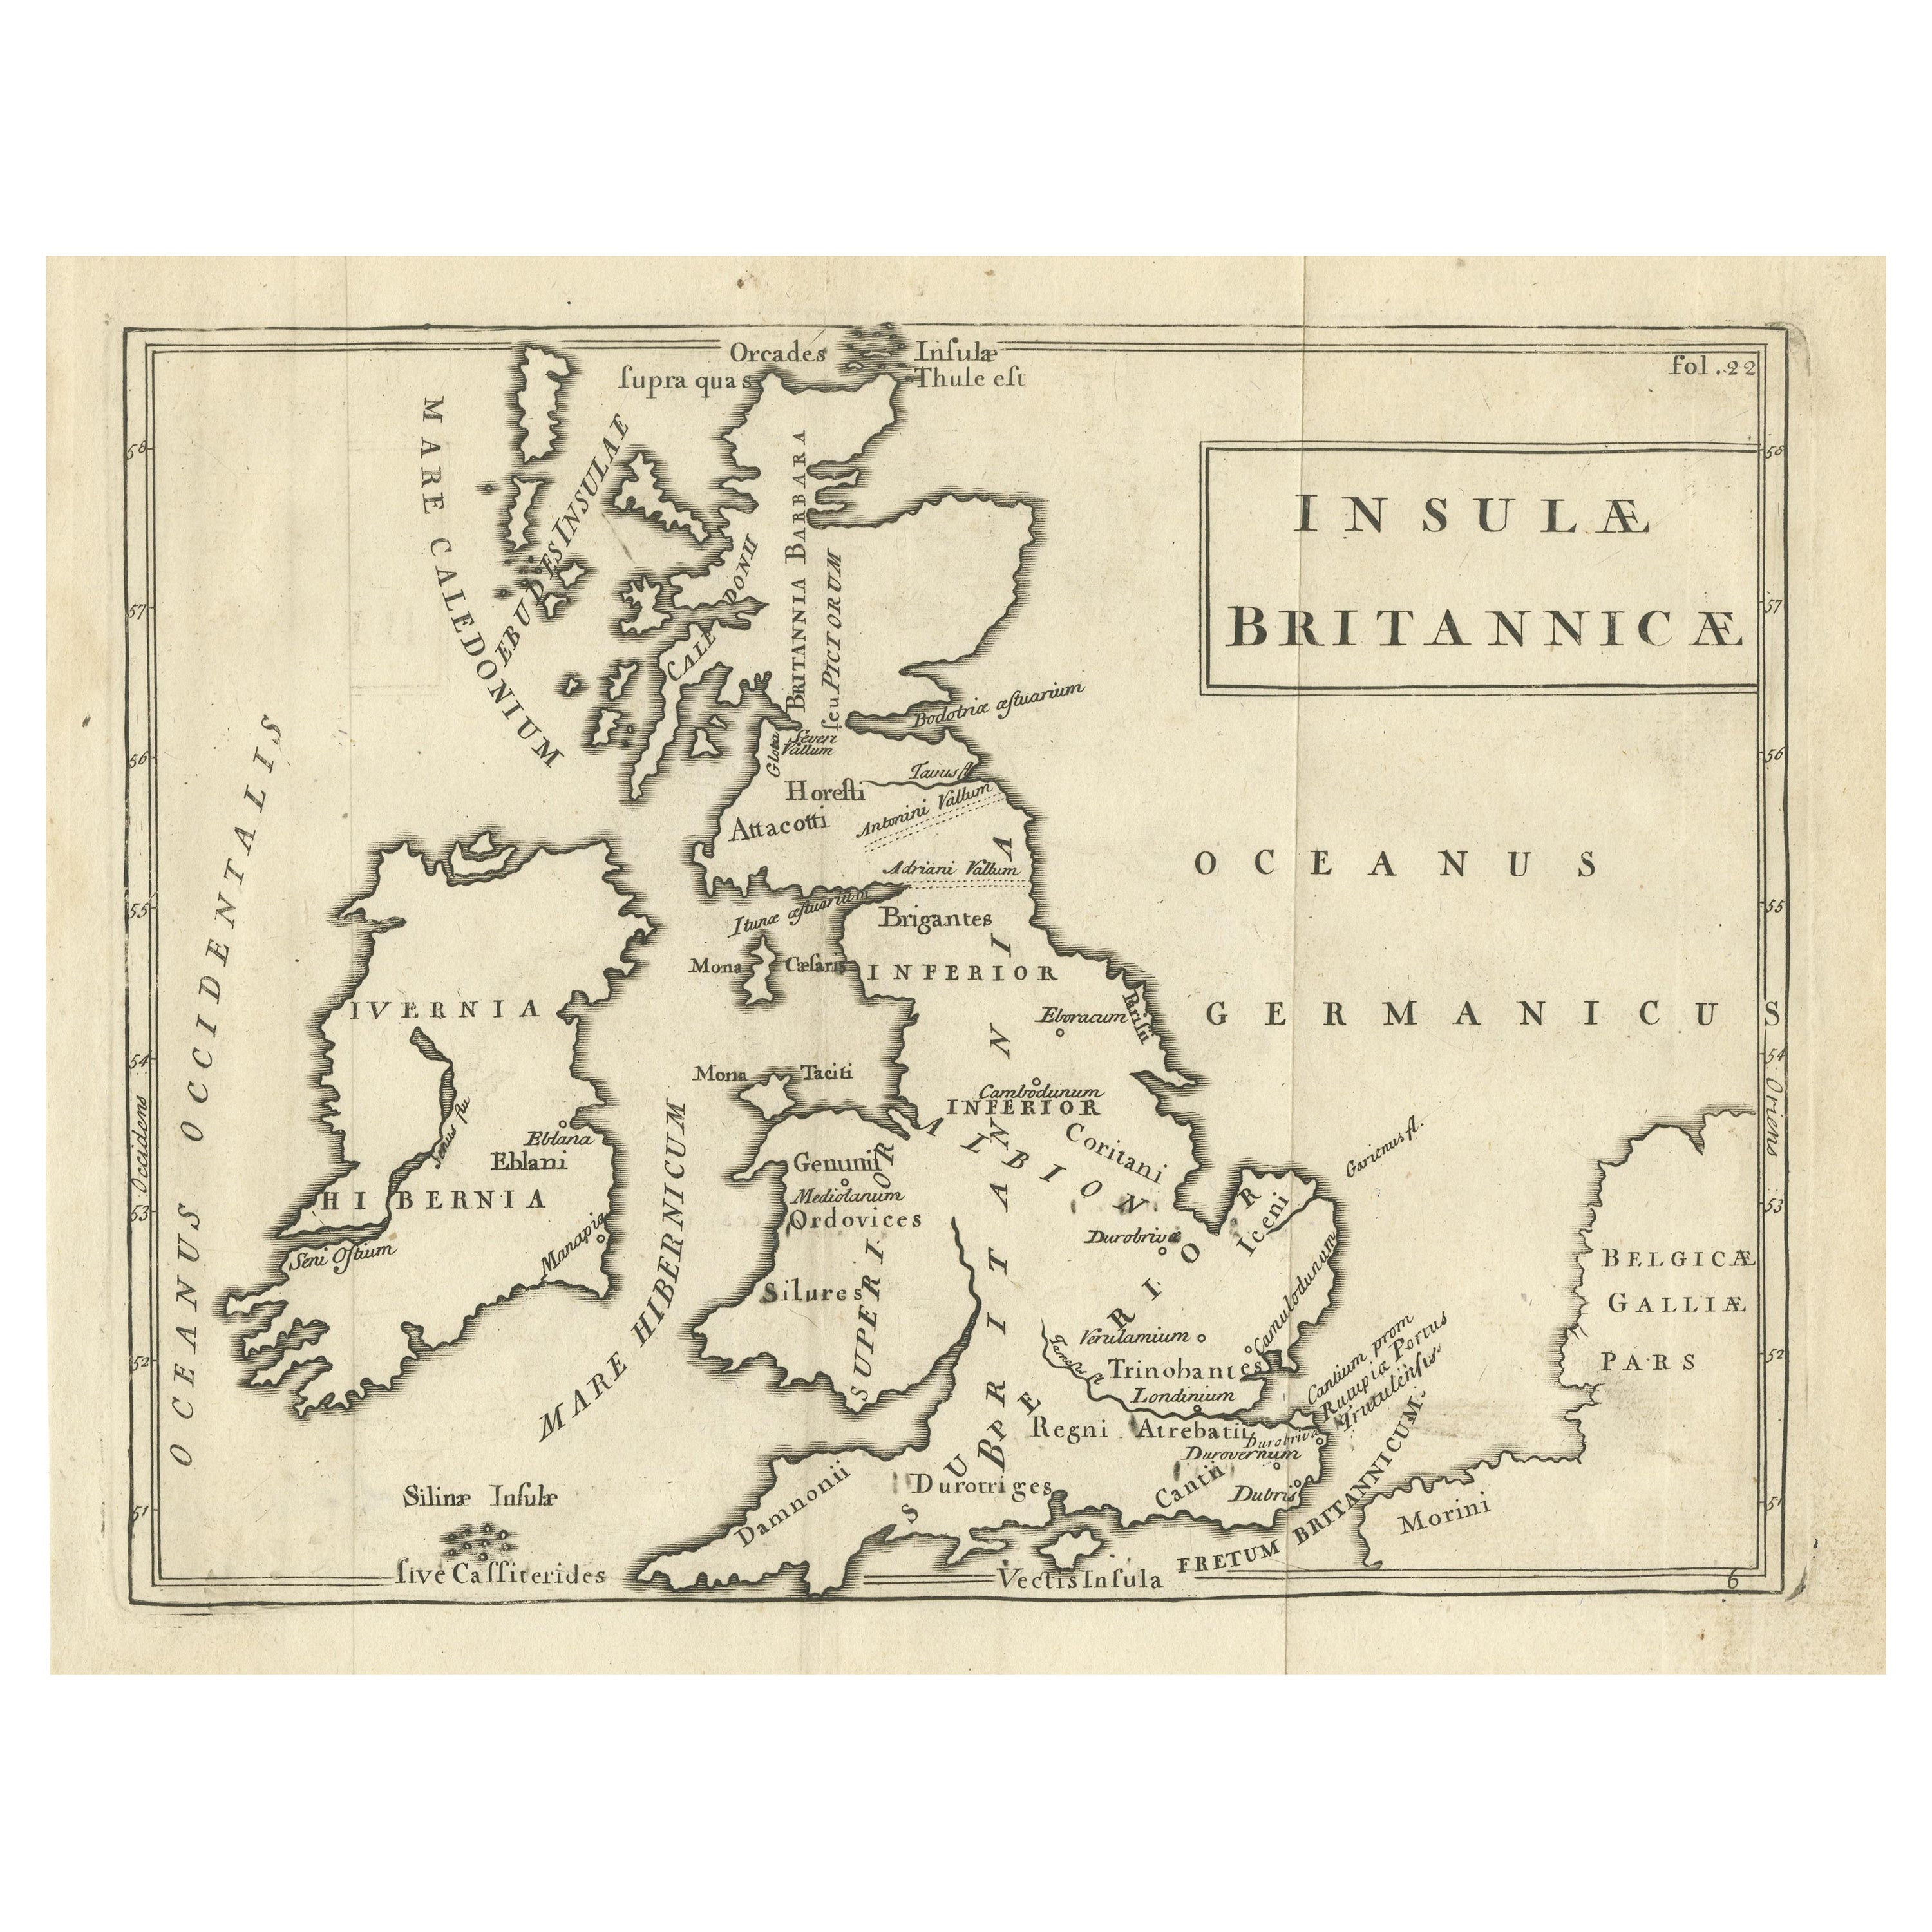 Antique Map of the British Isles with Walls, Settlements and Other Features